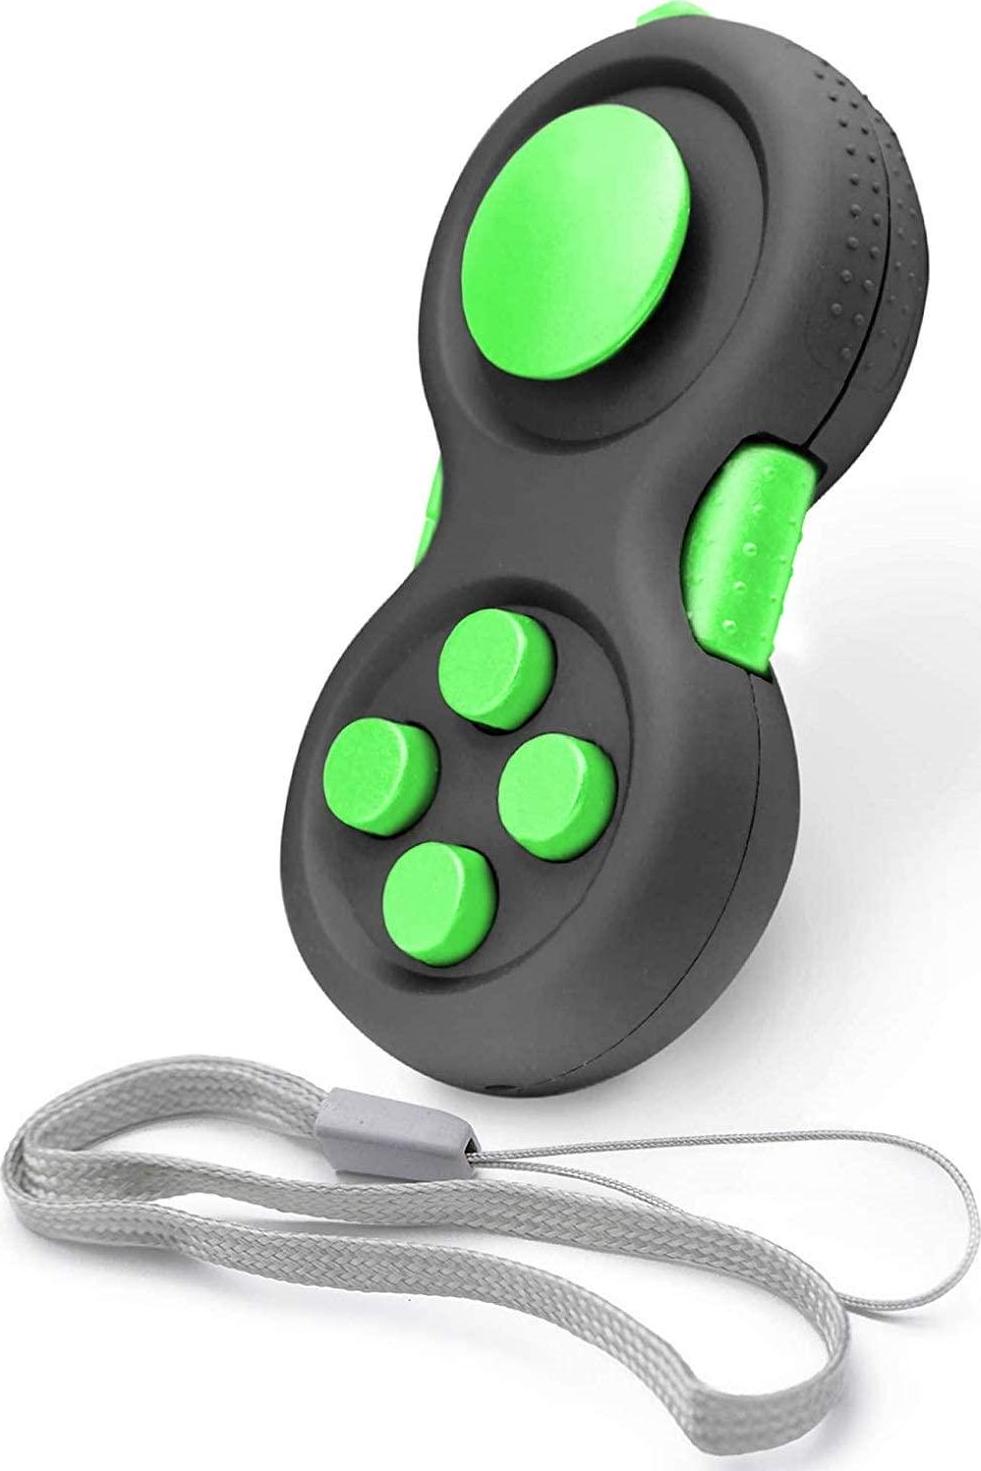 GBLW-TOPAU, Fidget Pad - Perfect for Skin Picking - Anxiety and Stress Relief - Fidget Toy - Children and Adults (Green)